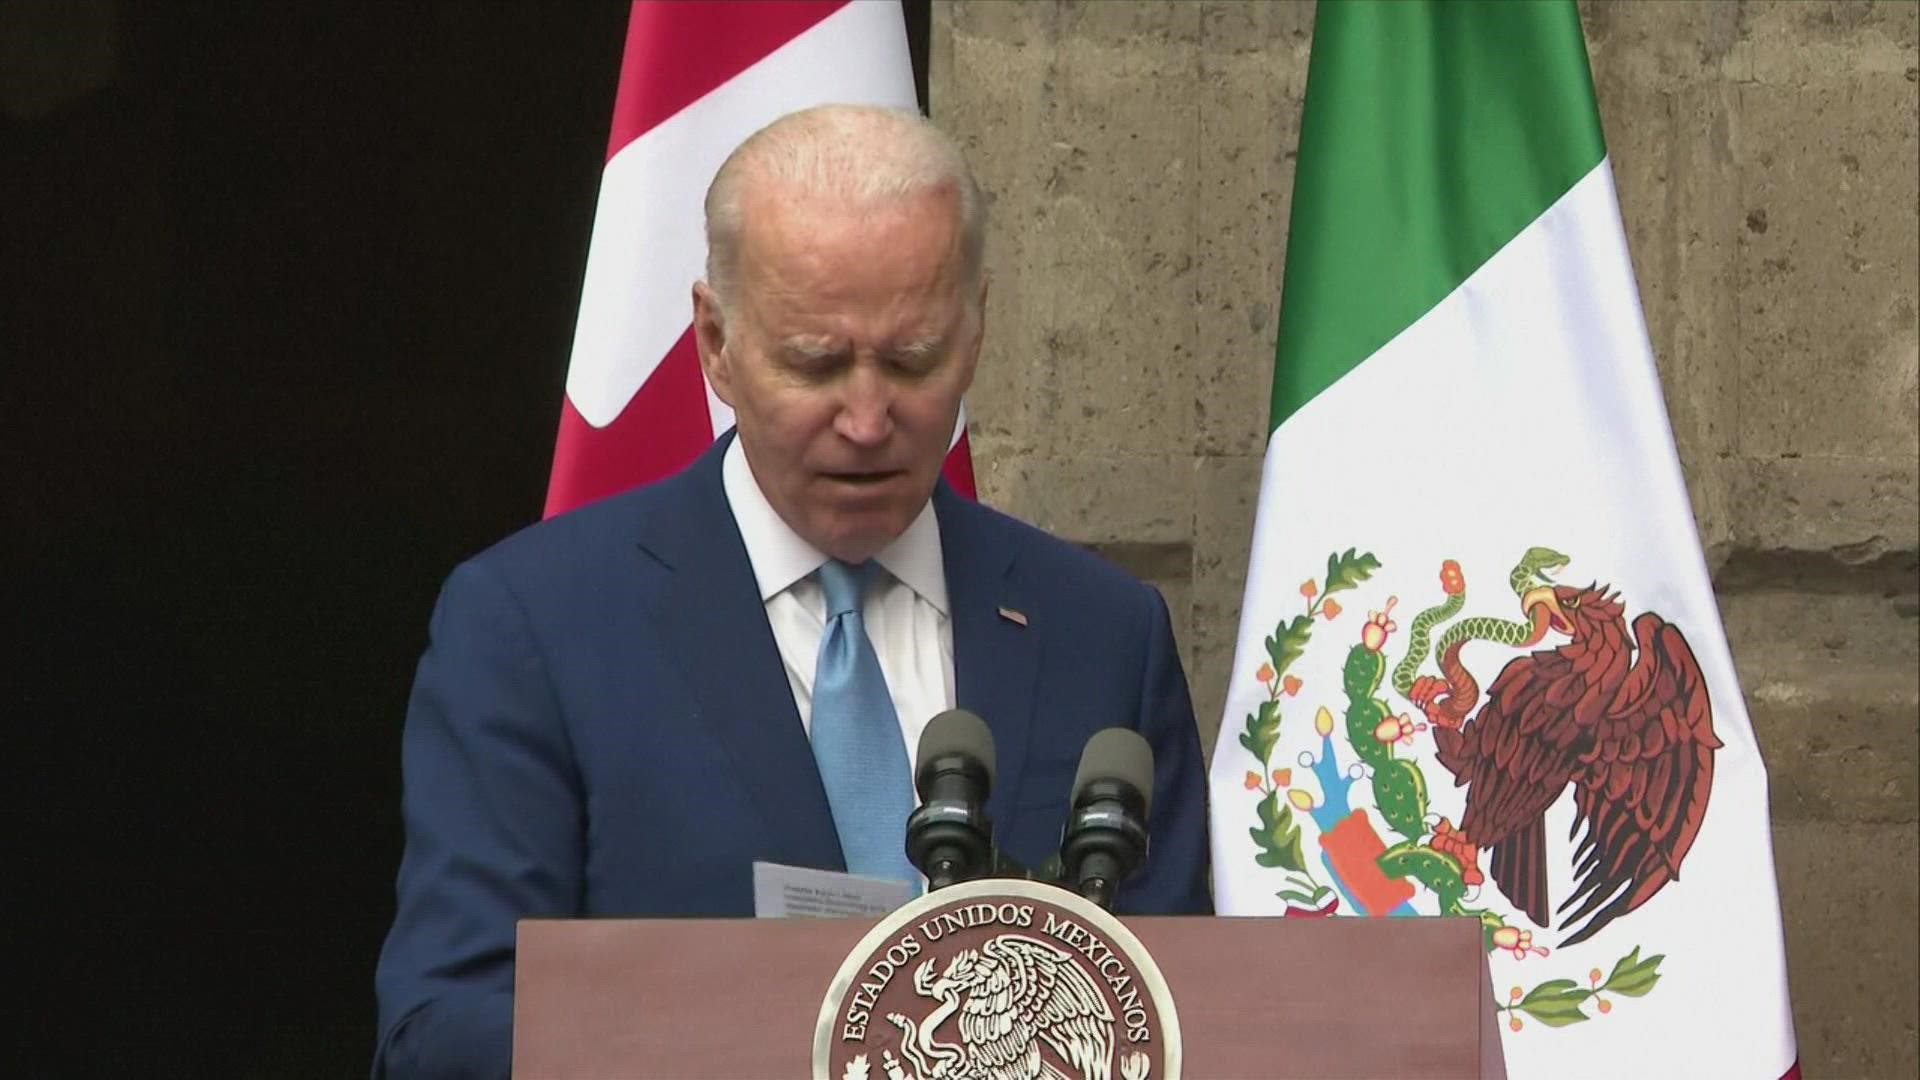 Biden says he doesn't know what’s in the documents, adding his lawyers have suggested he not inquire what was in them.